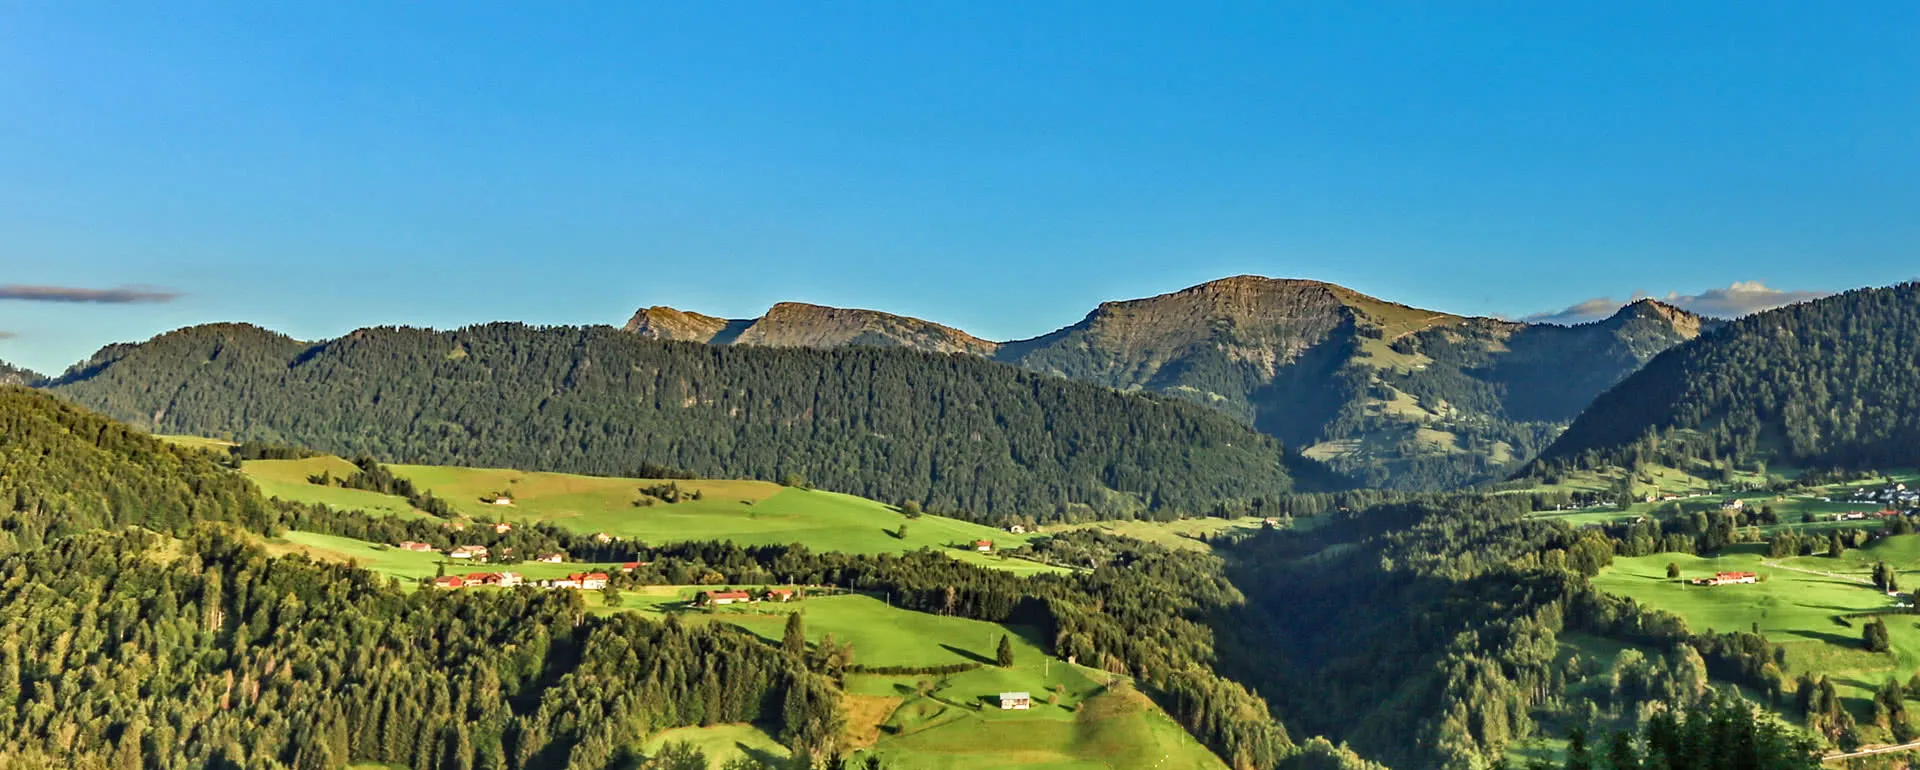 Oberstaufen - the destination with youth hostels